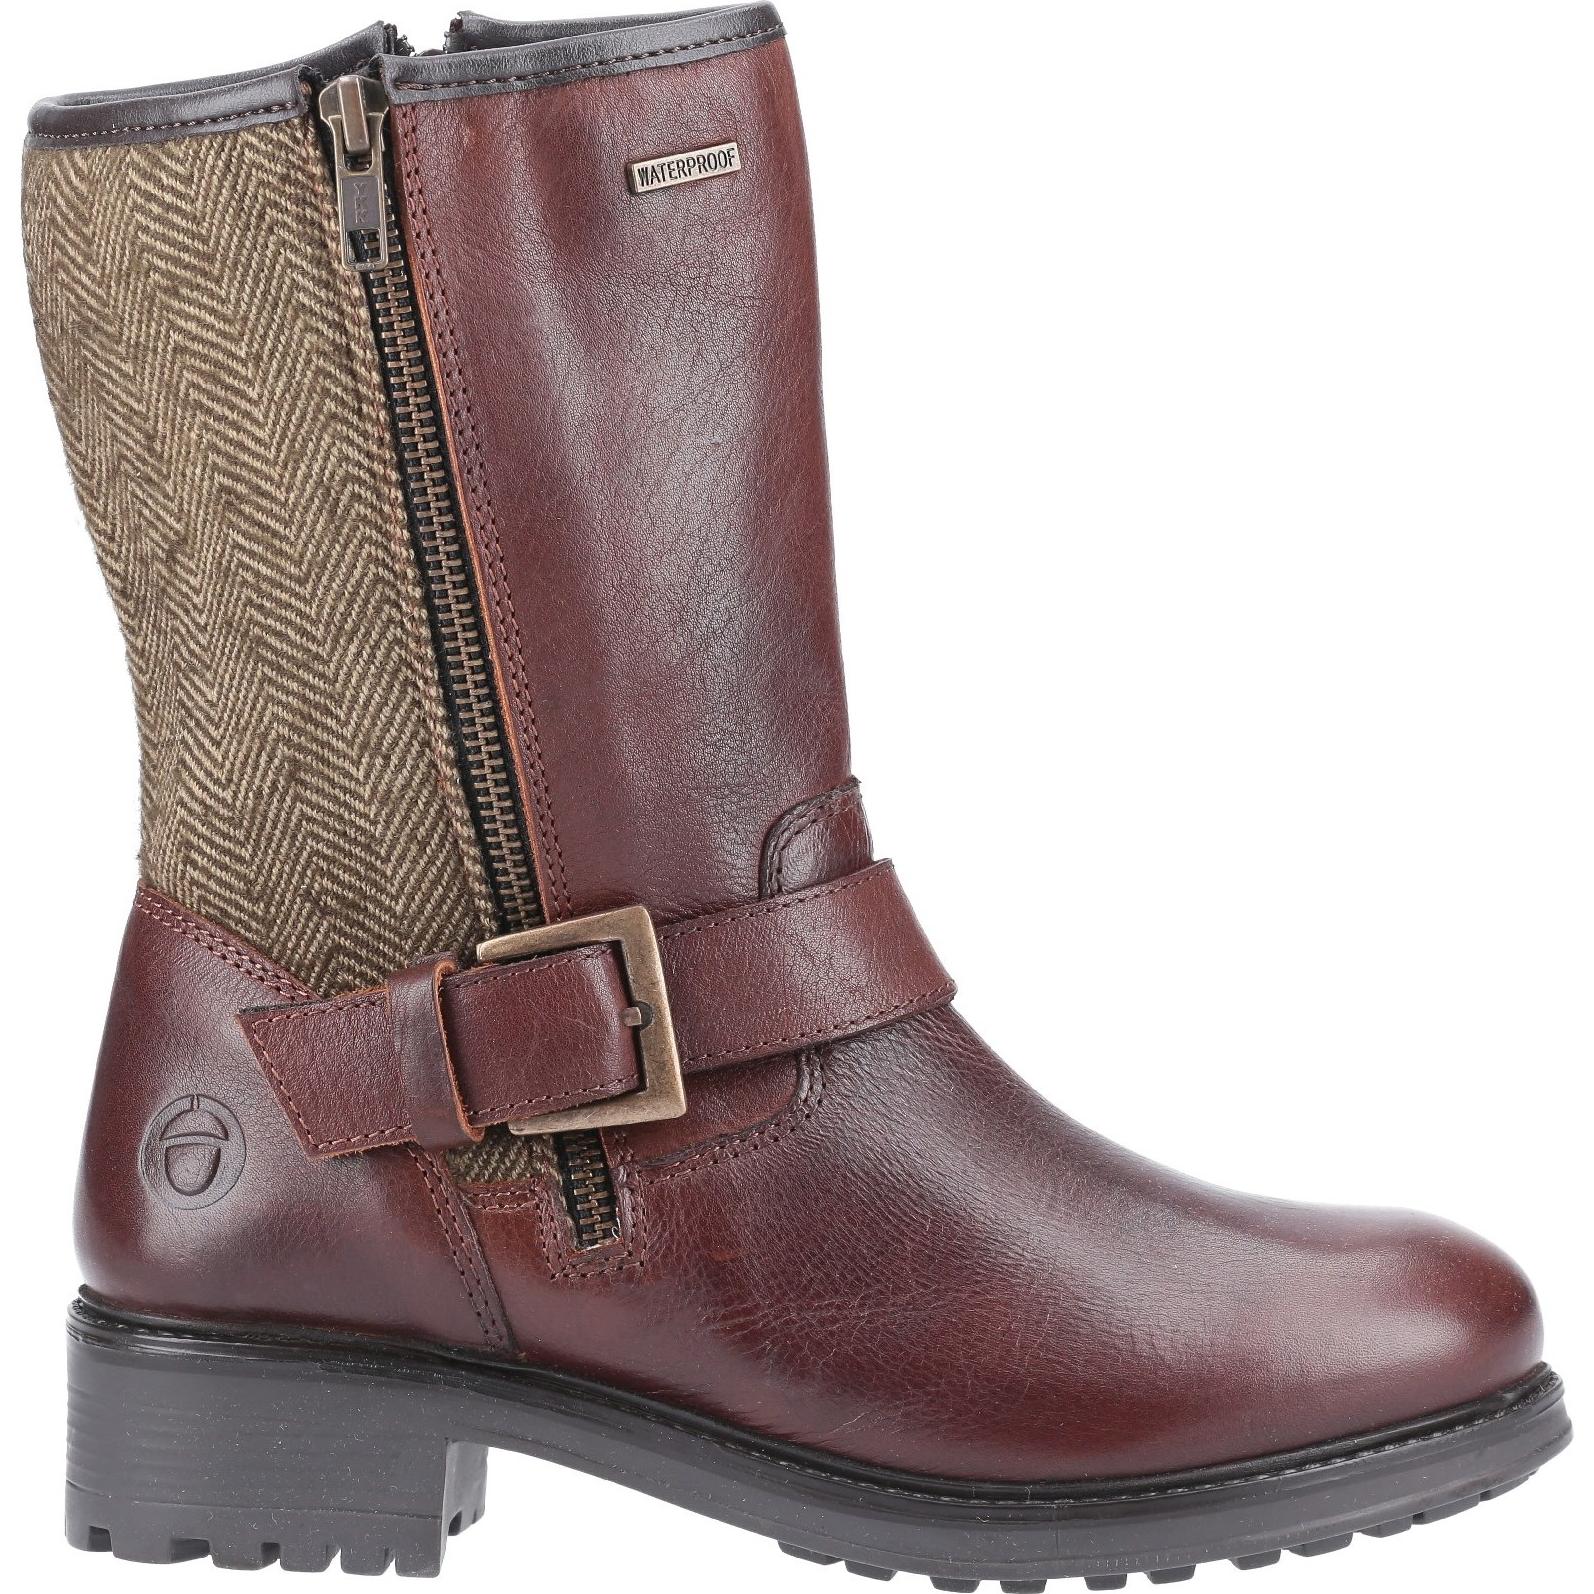 Cotswold Twigworth Mid Calf Zip Boot